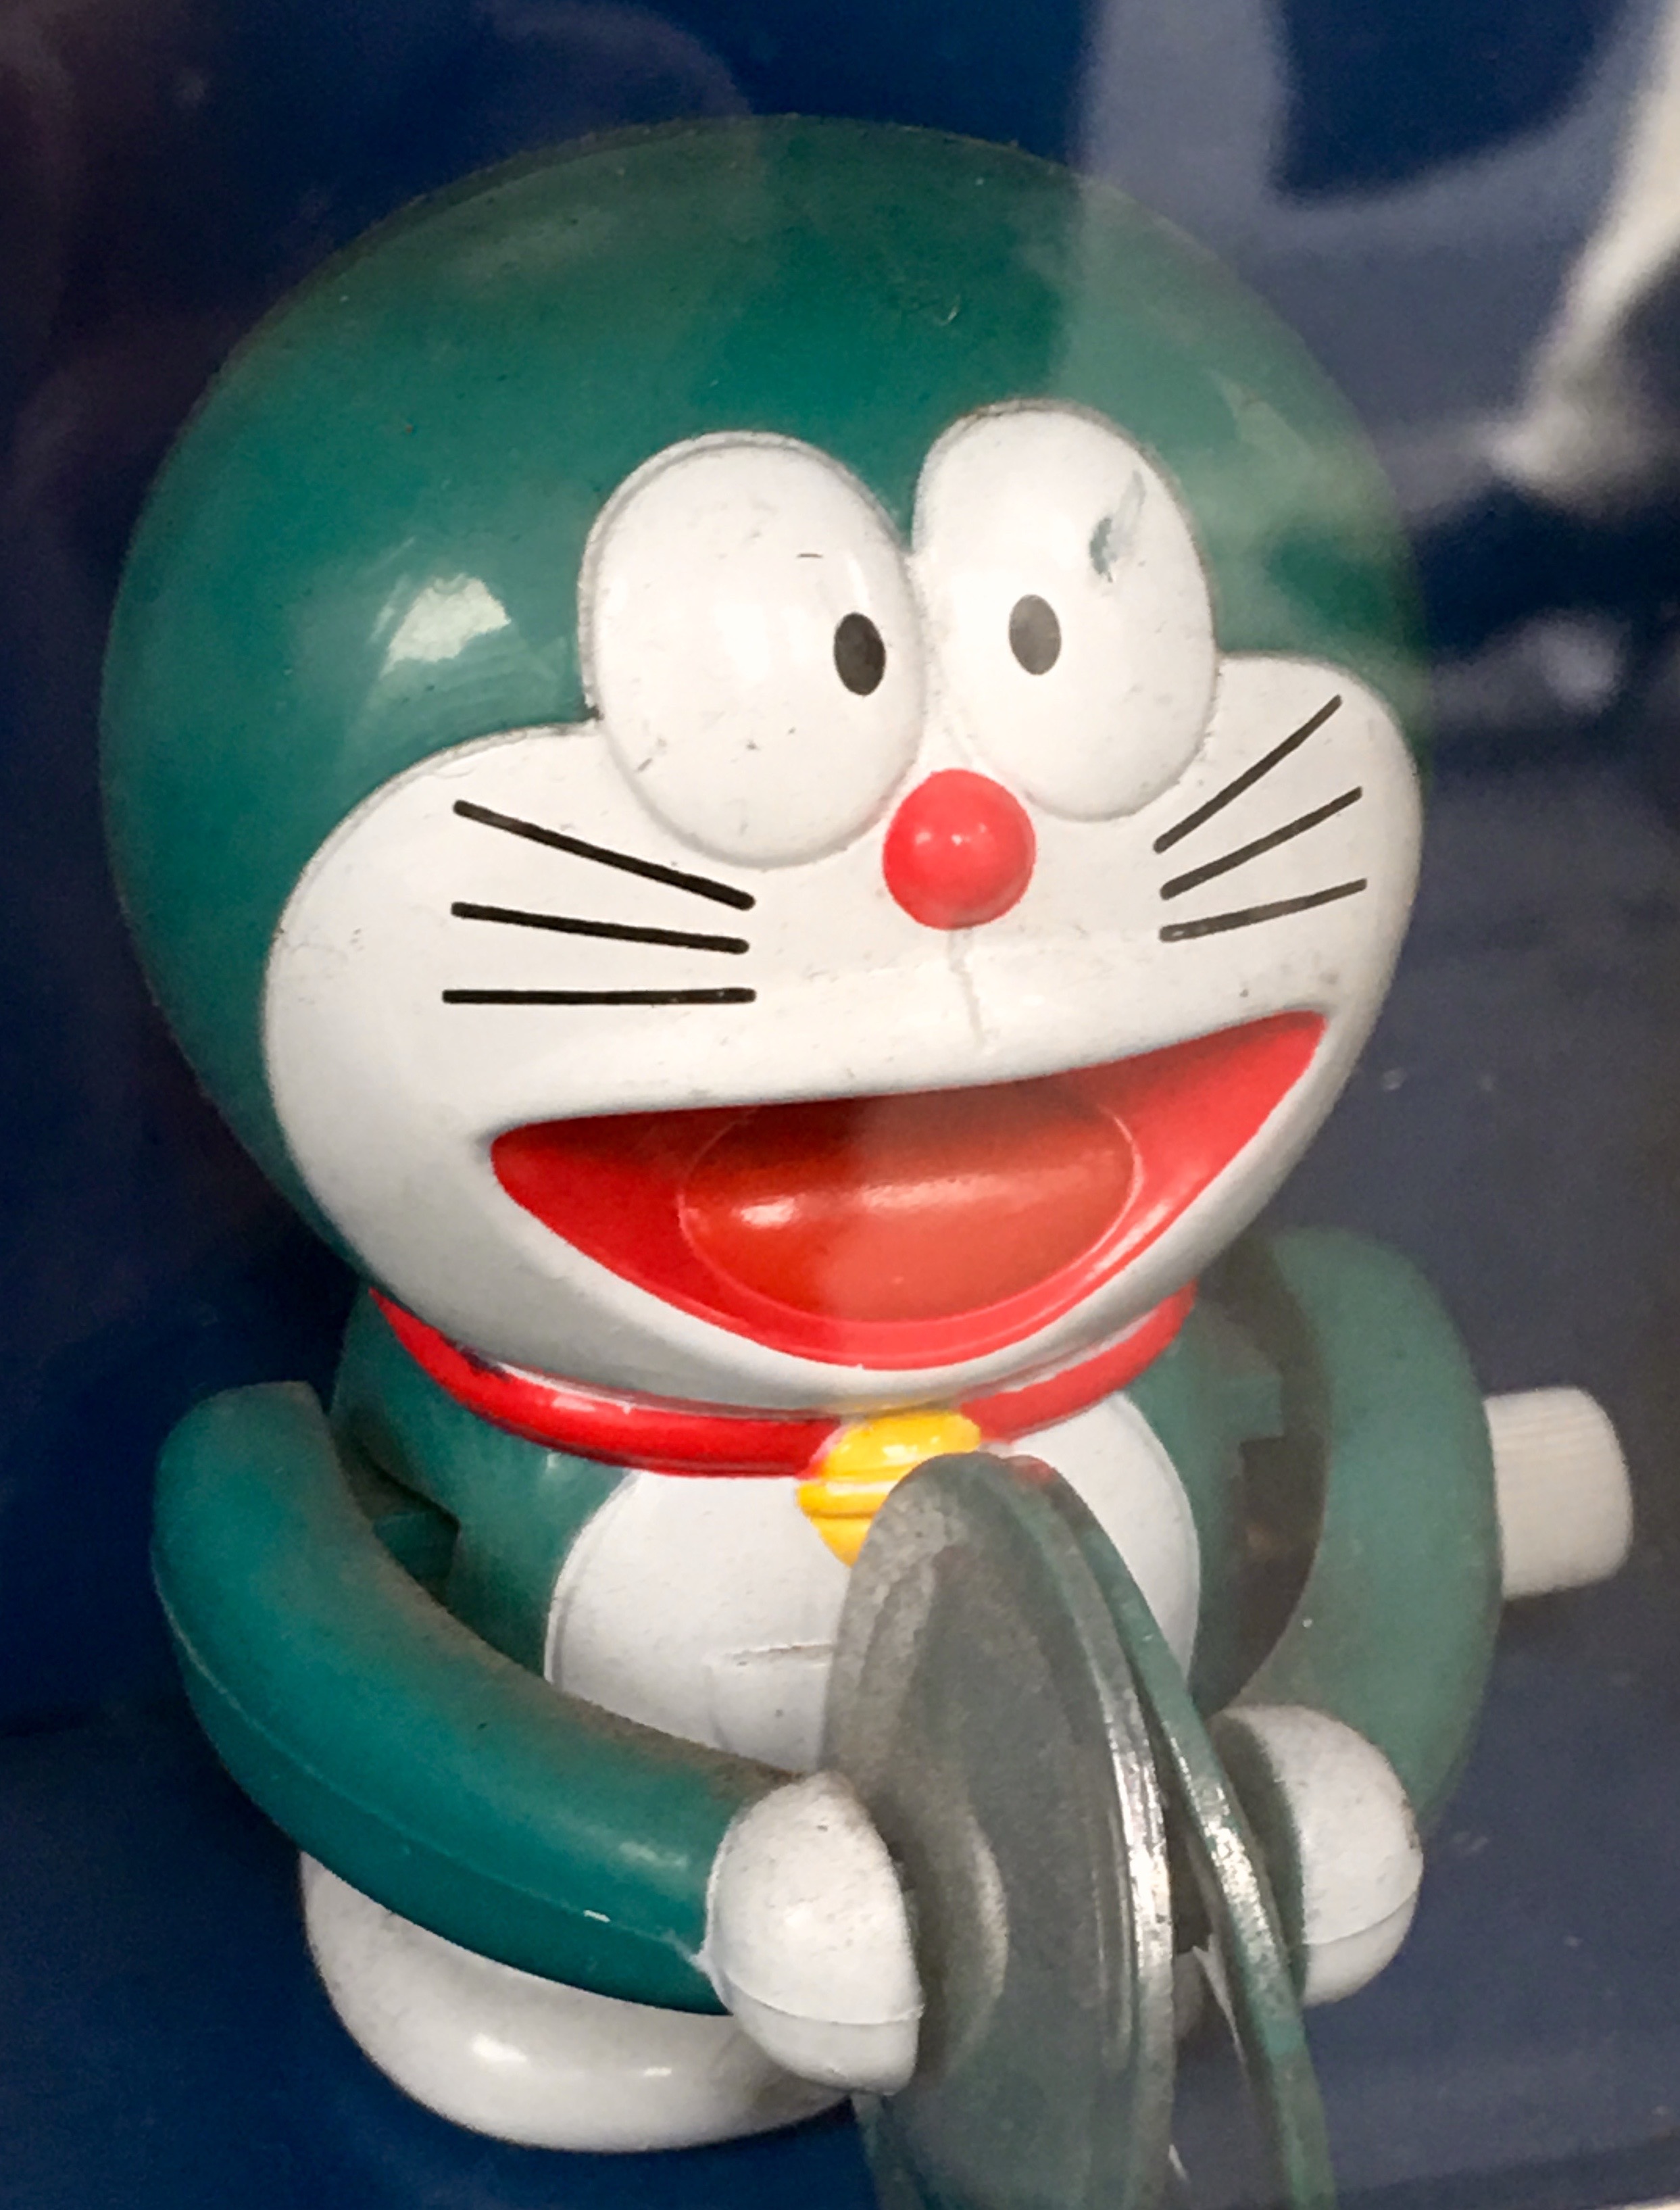 Doraemon toy in food store in Kappabashi-(Photo-© 2016 Louise Graber).